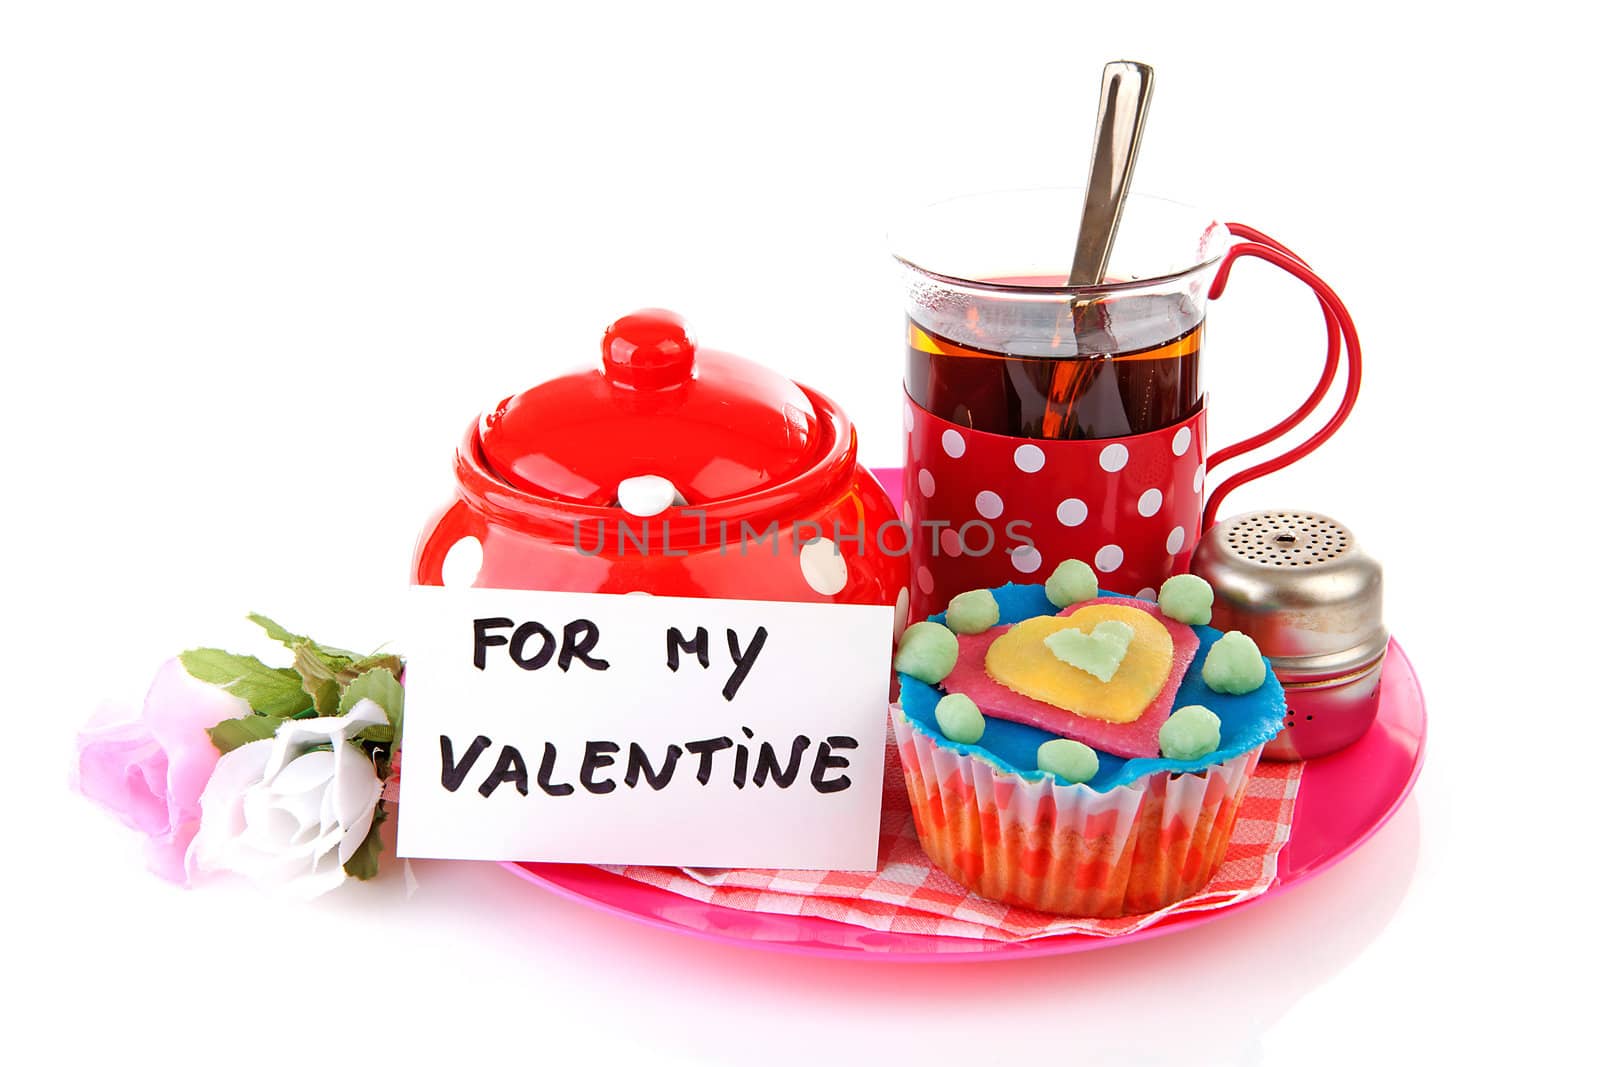 breakfast for my Valentine; cup of tea and cupcake over white background